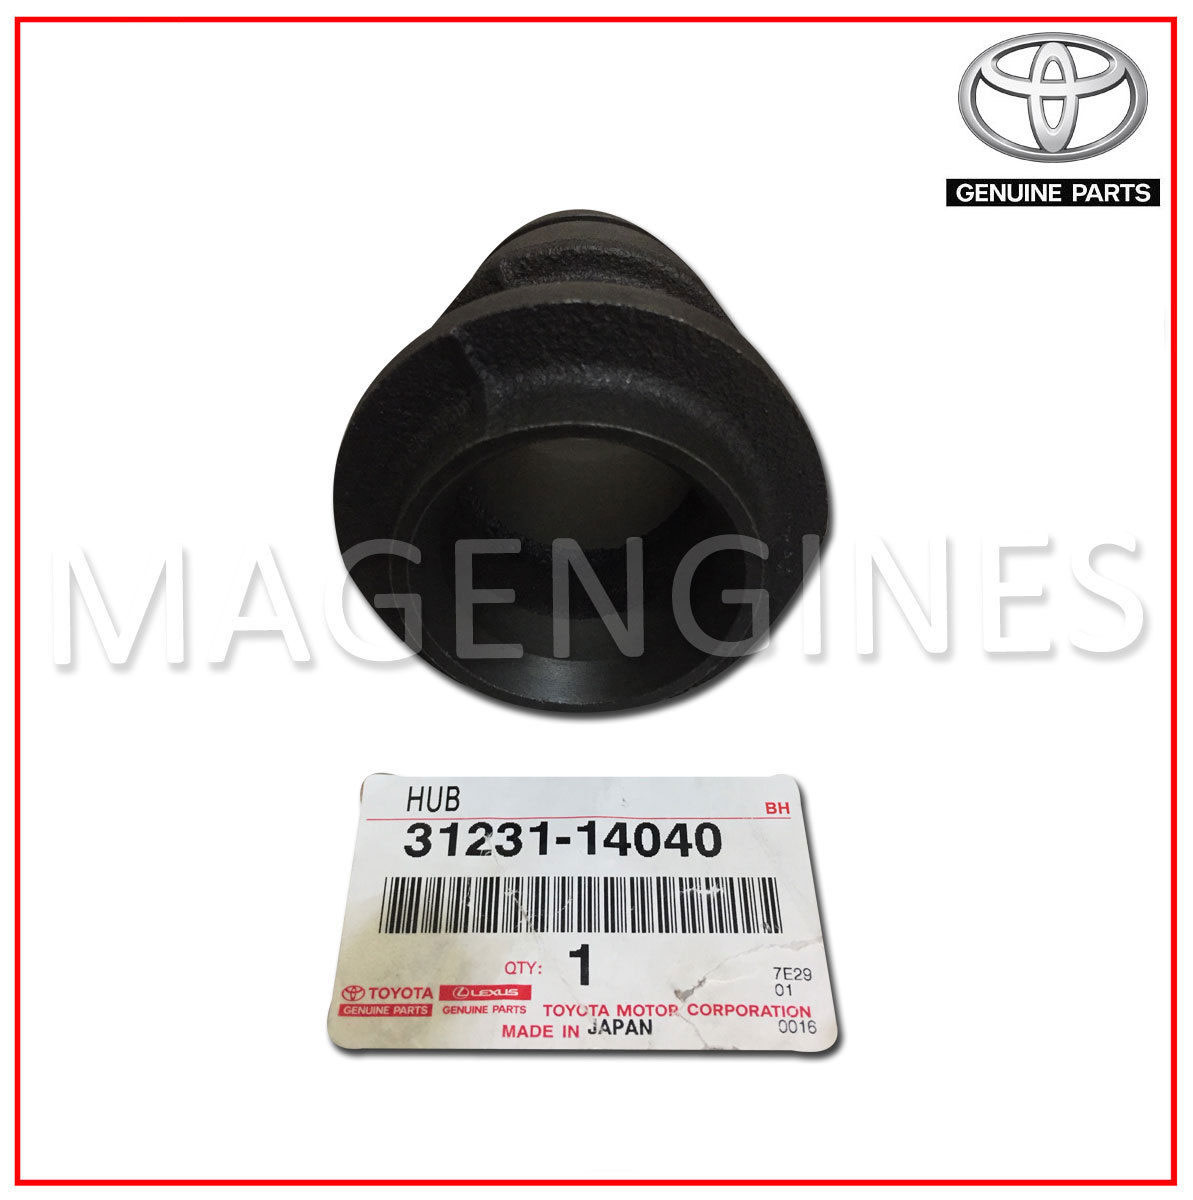 Gear 41331-14040 Genuine Toyota Parts Differential S 